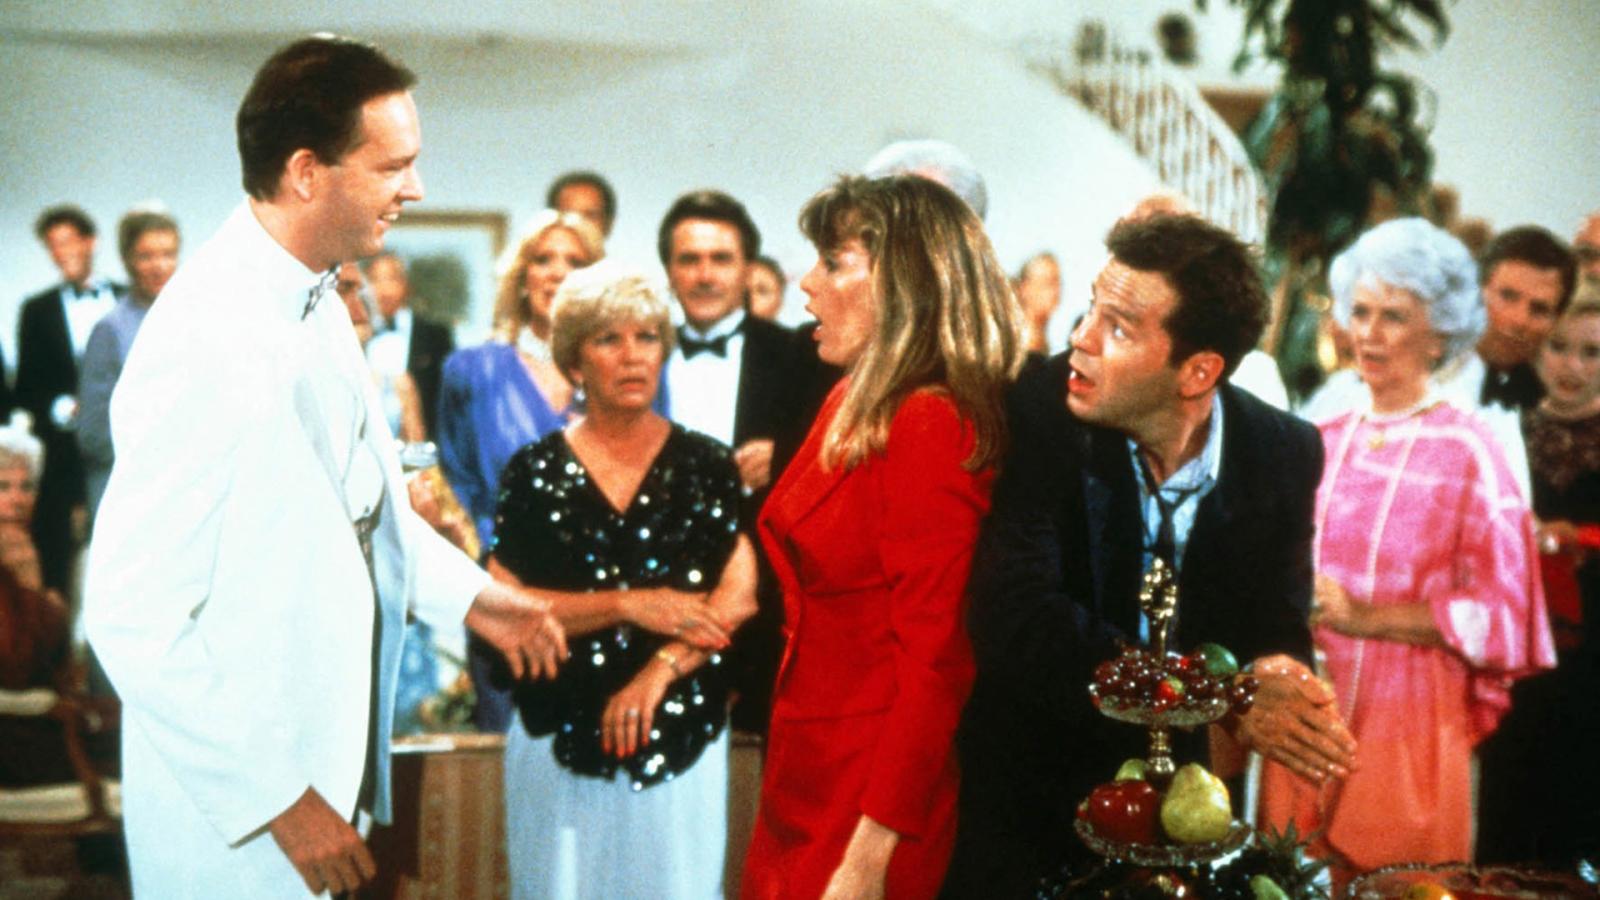 12 Forgotten Romantic Comedies of the '80s That Are Pure Gold - image 4